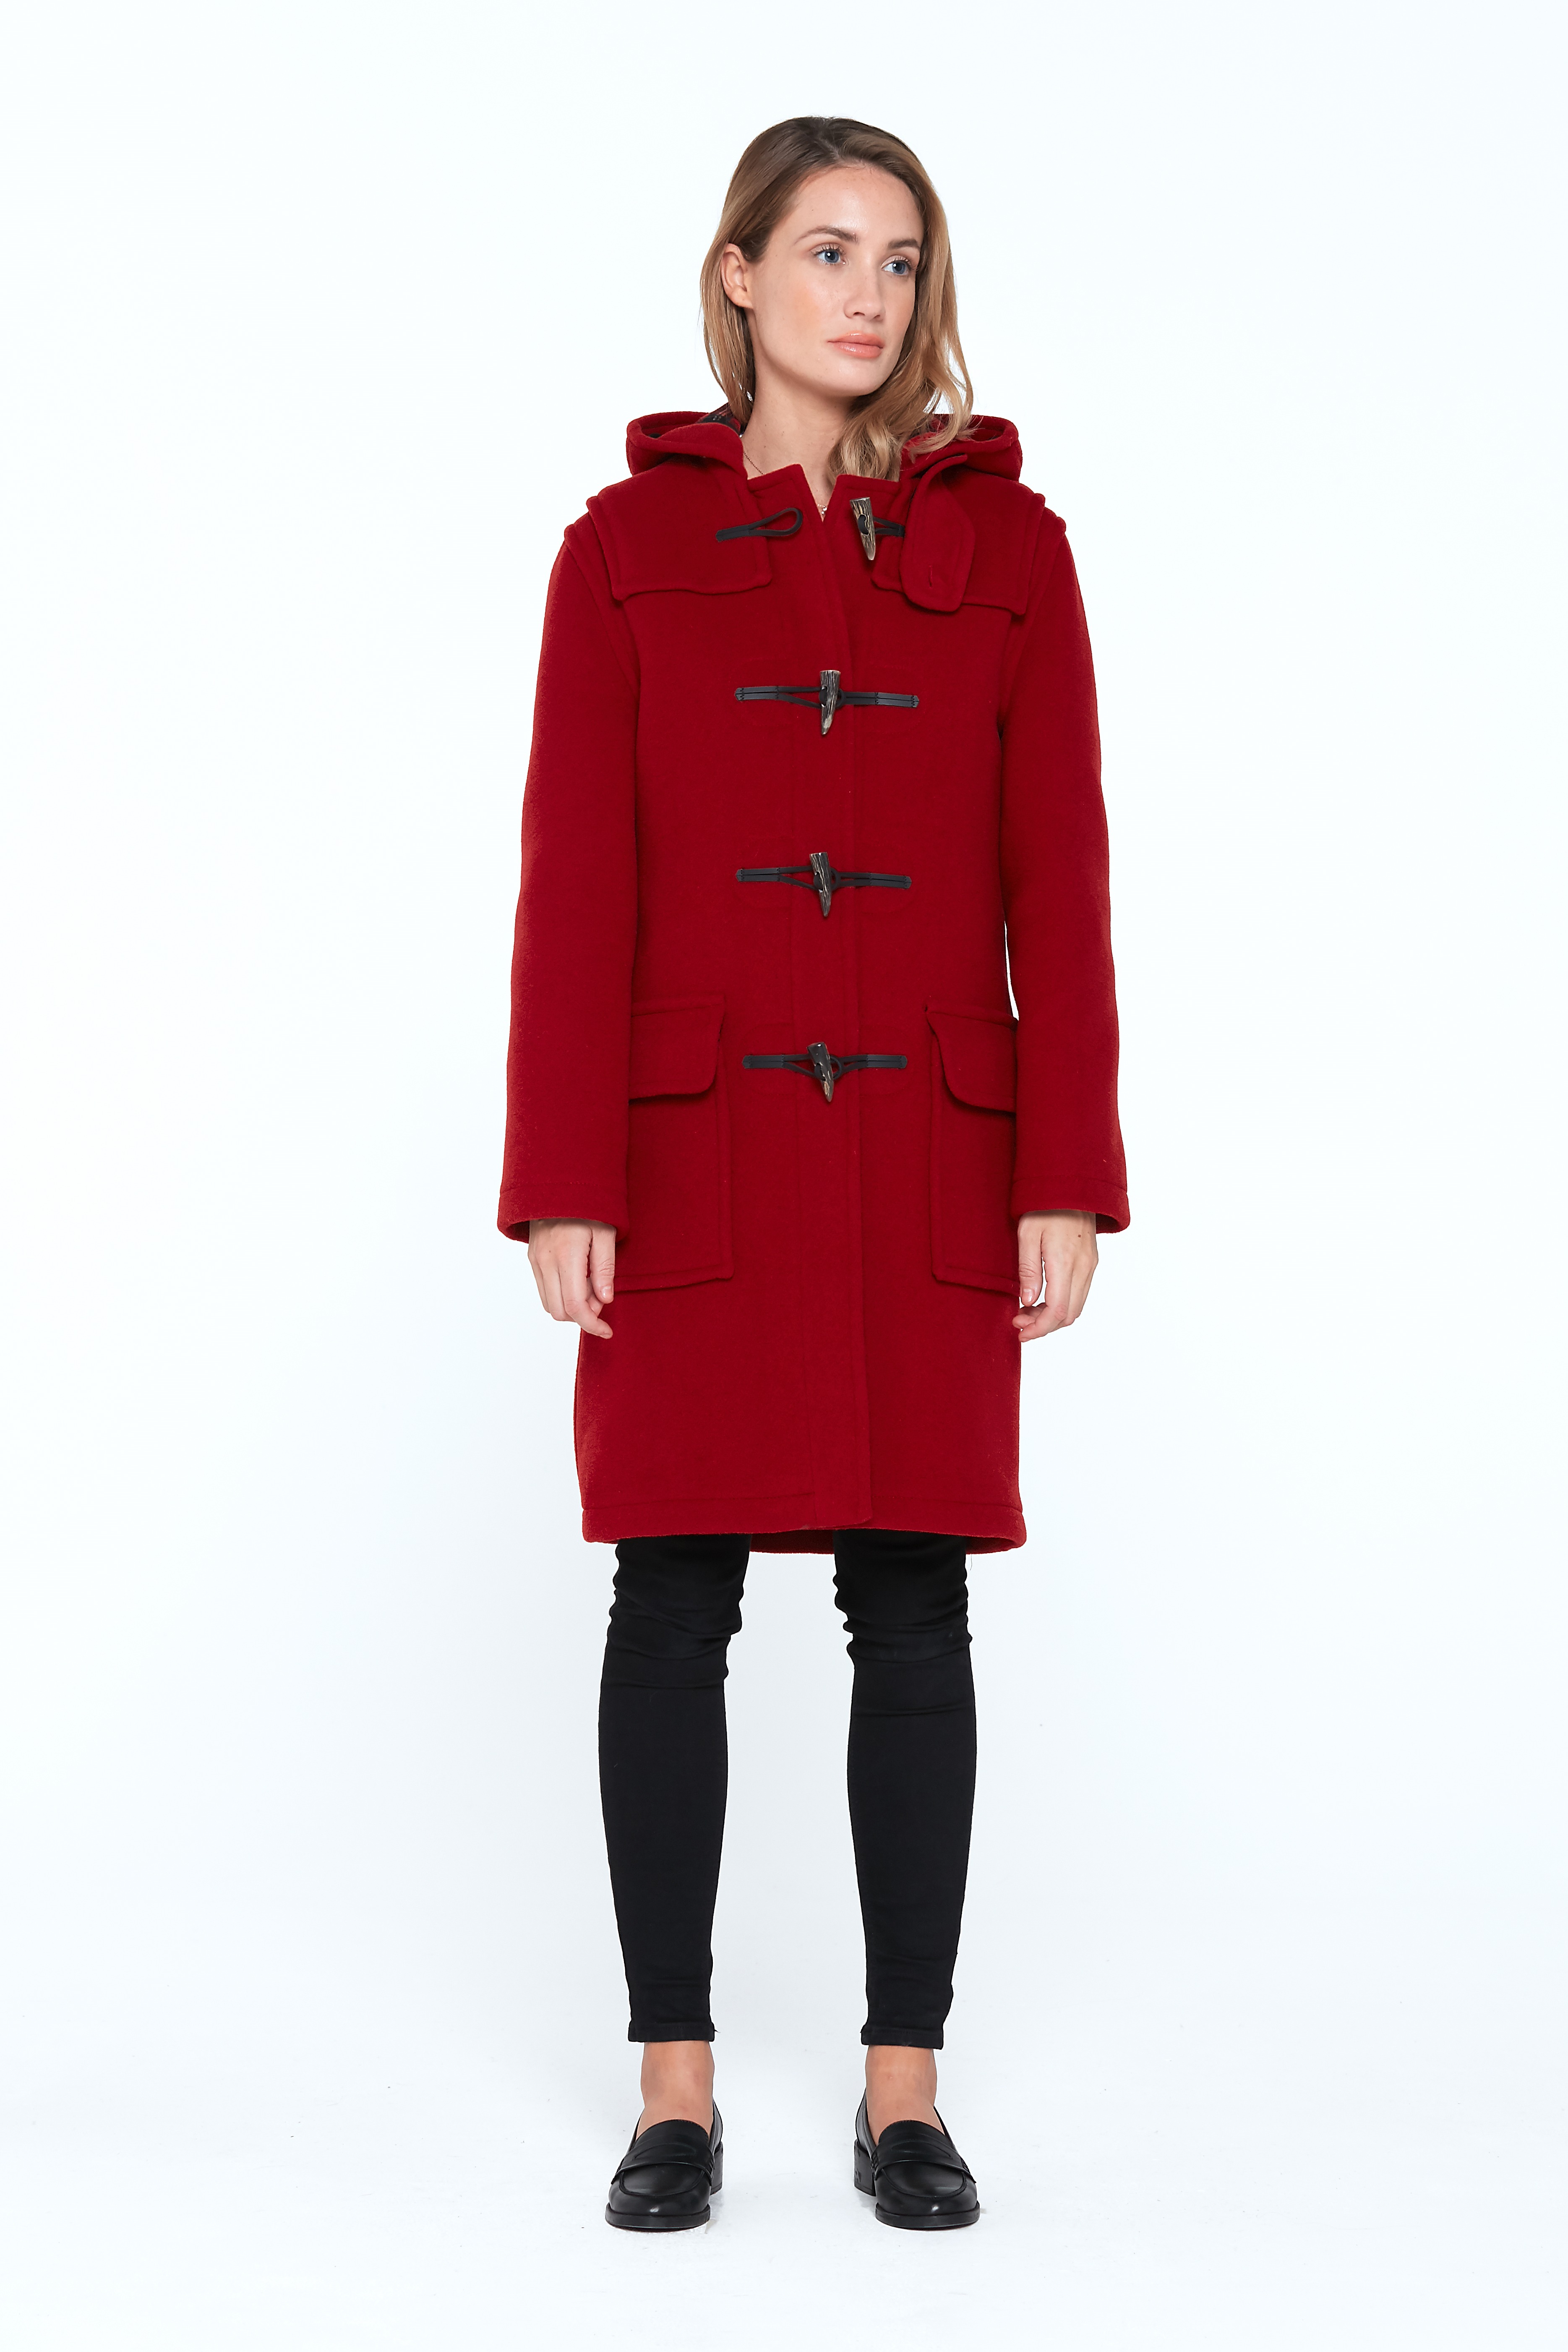 Women's Coats and Outerwear | London Tradition